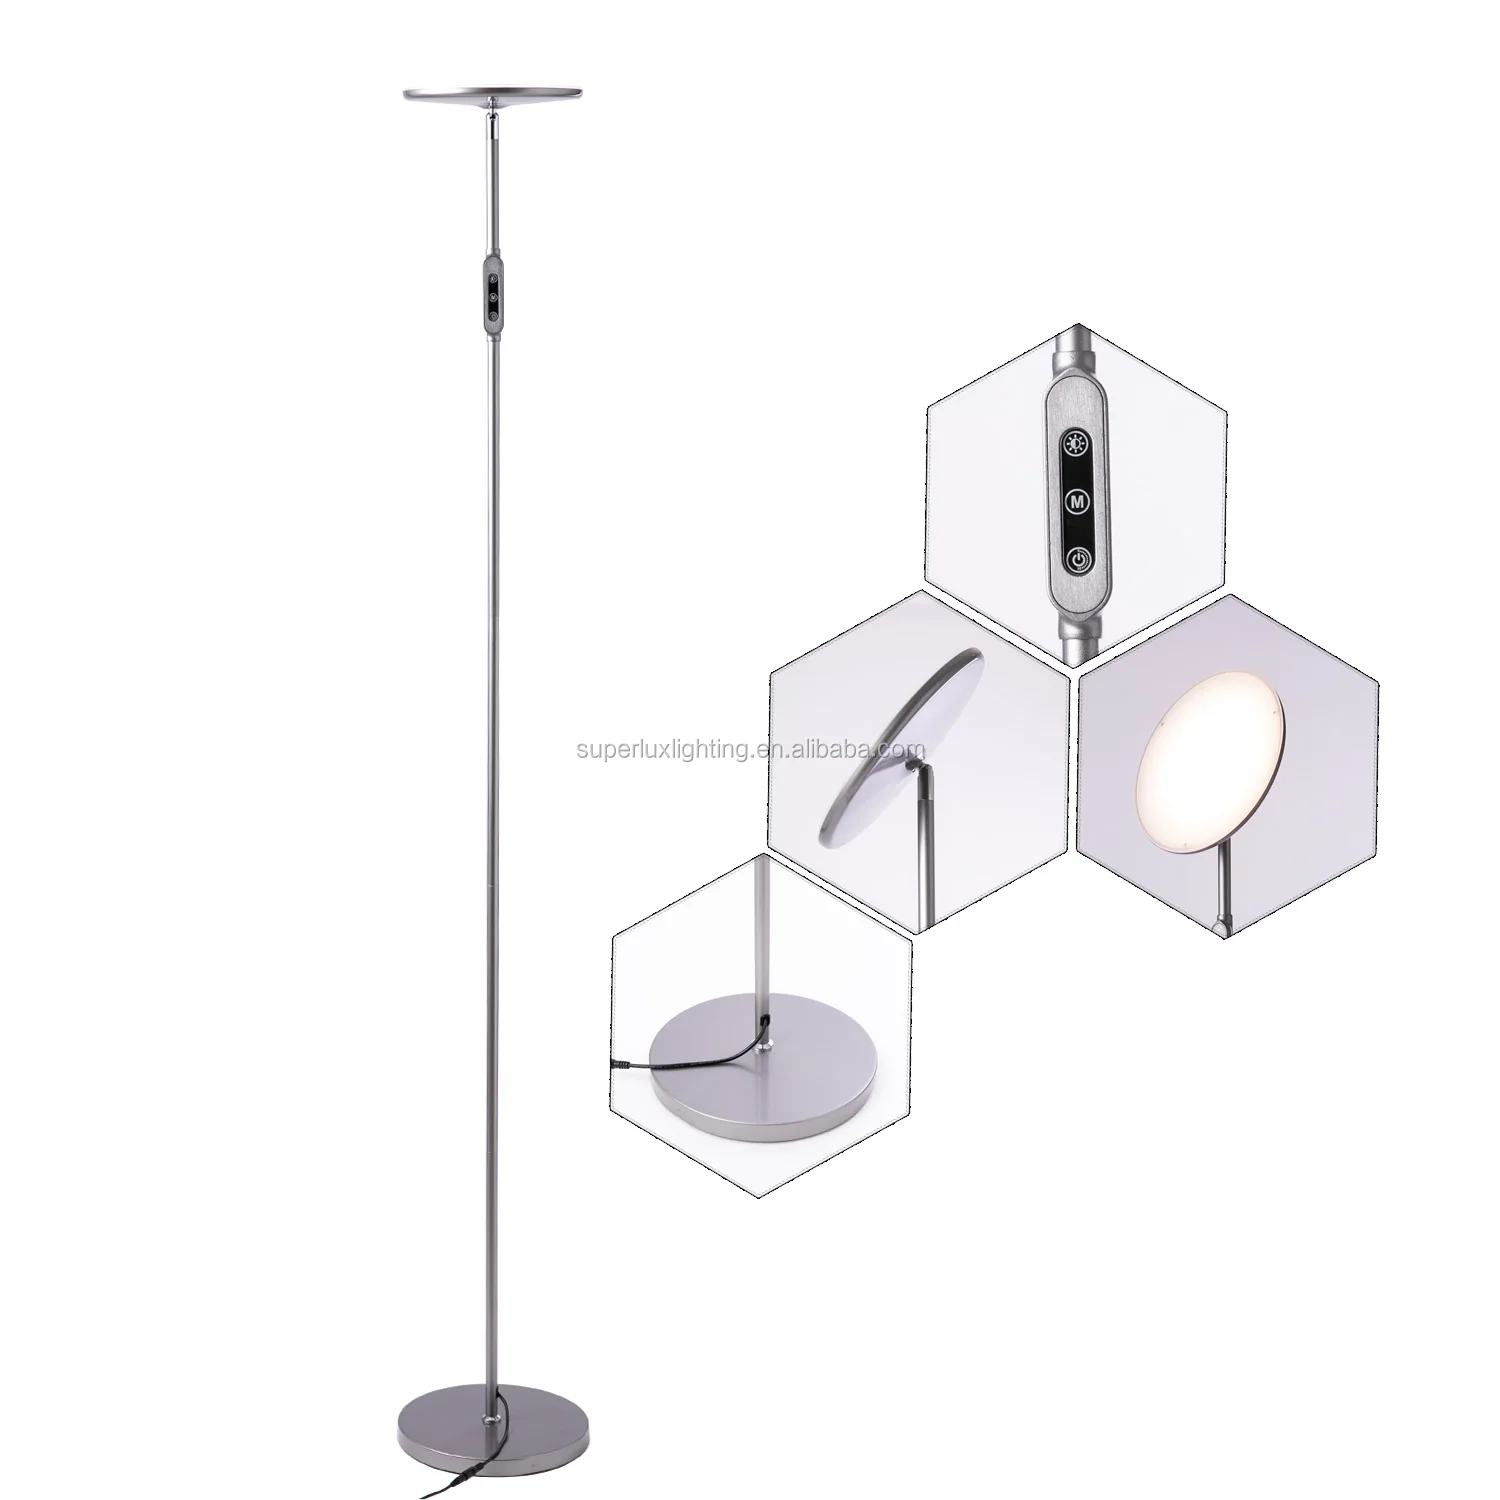 Modern style standing floor light office lamp led with rotatable head